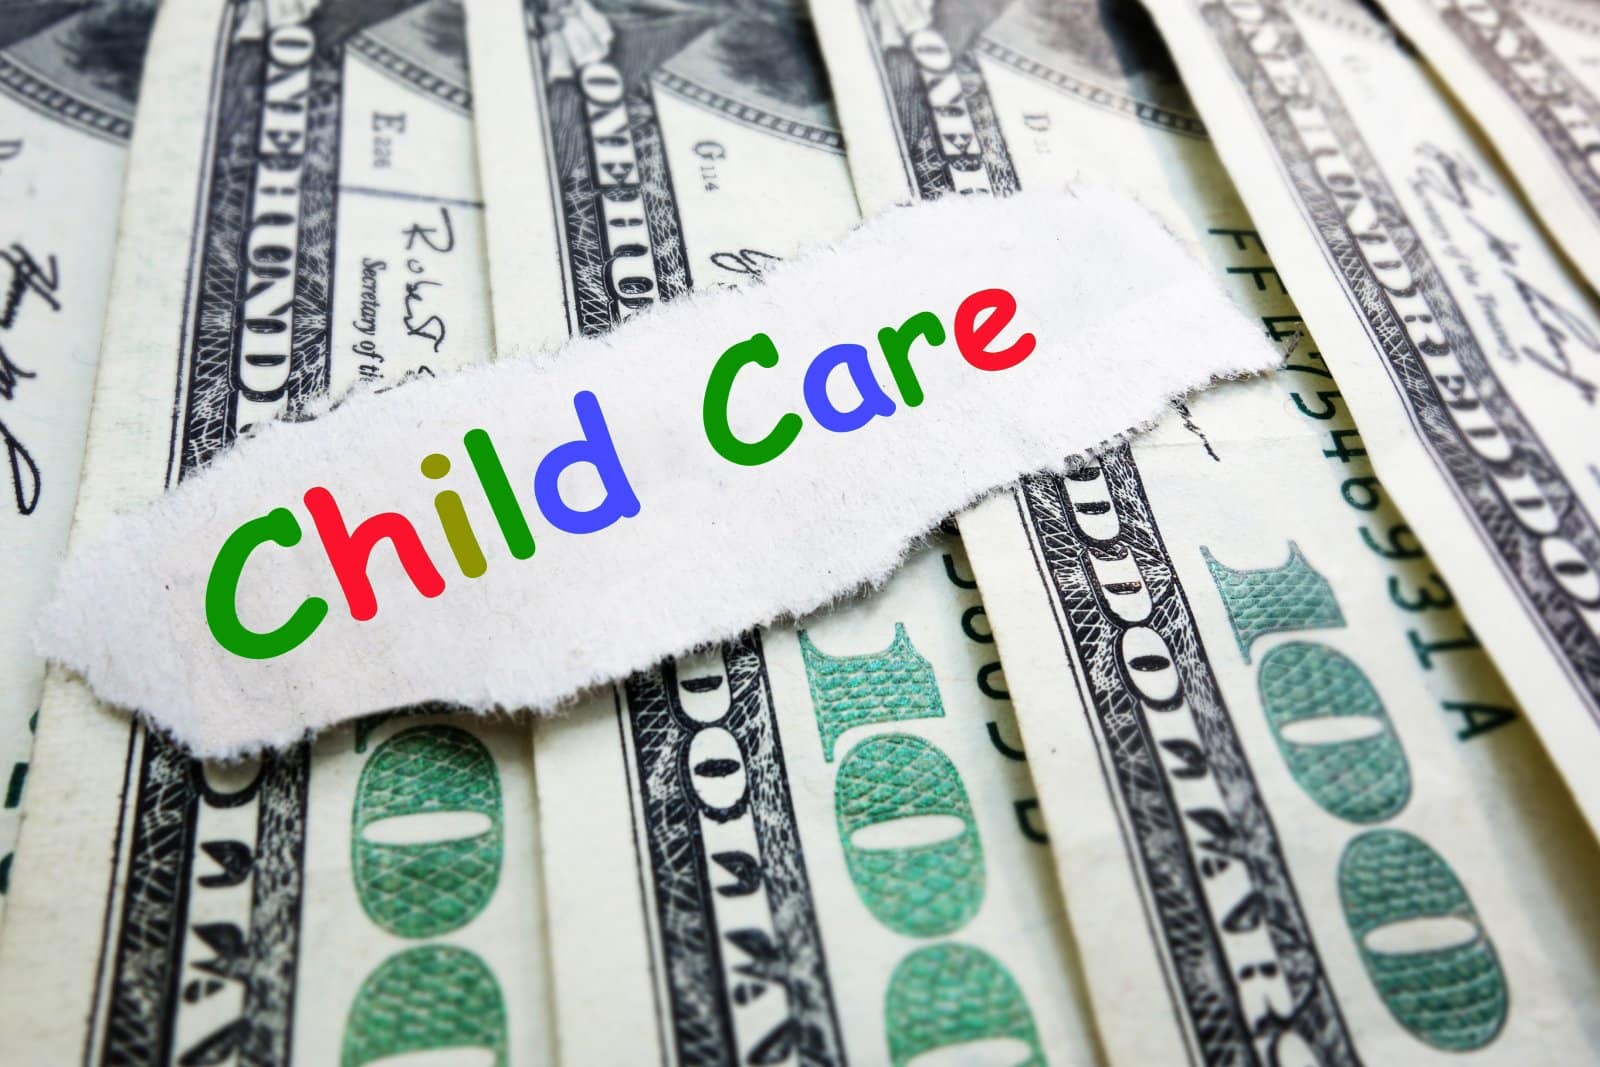 Image Credit: Shutterstock / zimmytws <p><span>The cost of raising a child in America is soaring, with child care often costing more than college tuition. Many mothers are forced to choose between their careers and affordable care for their children.</span></p>